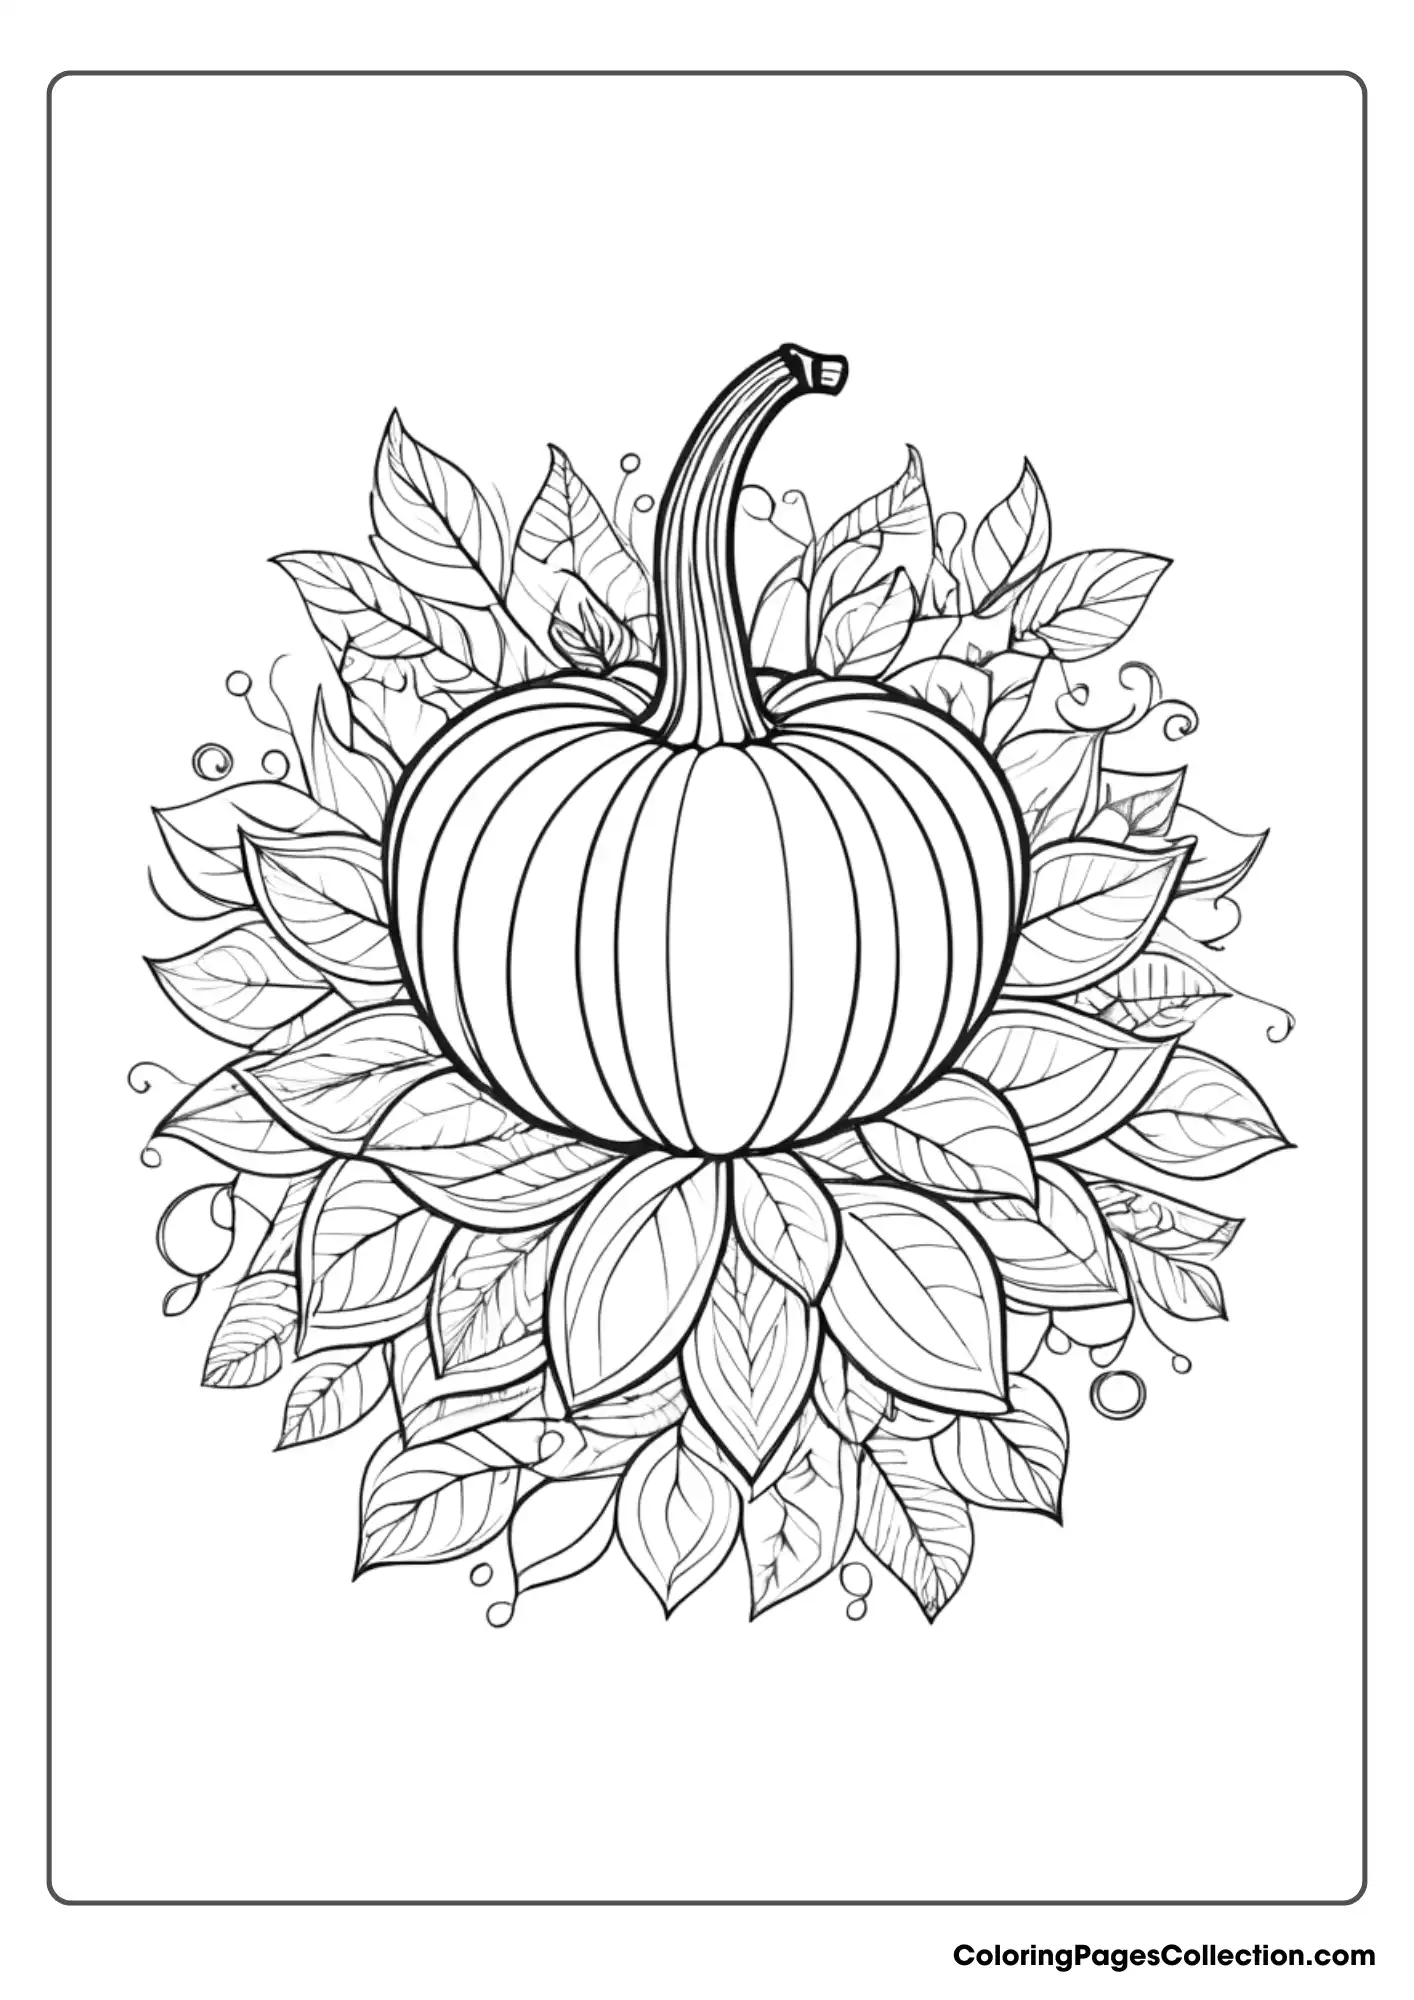 Coloring pages for teens, Pumpkin with Leaves